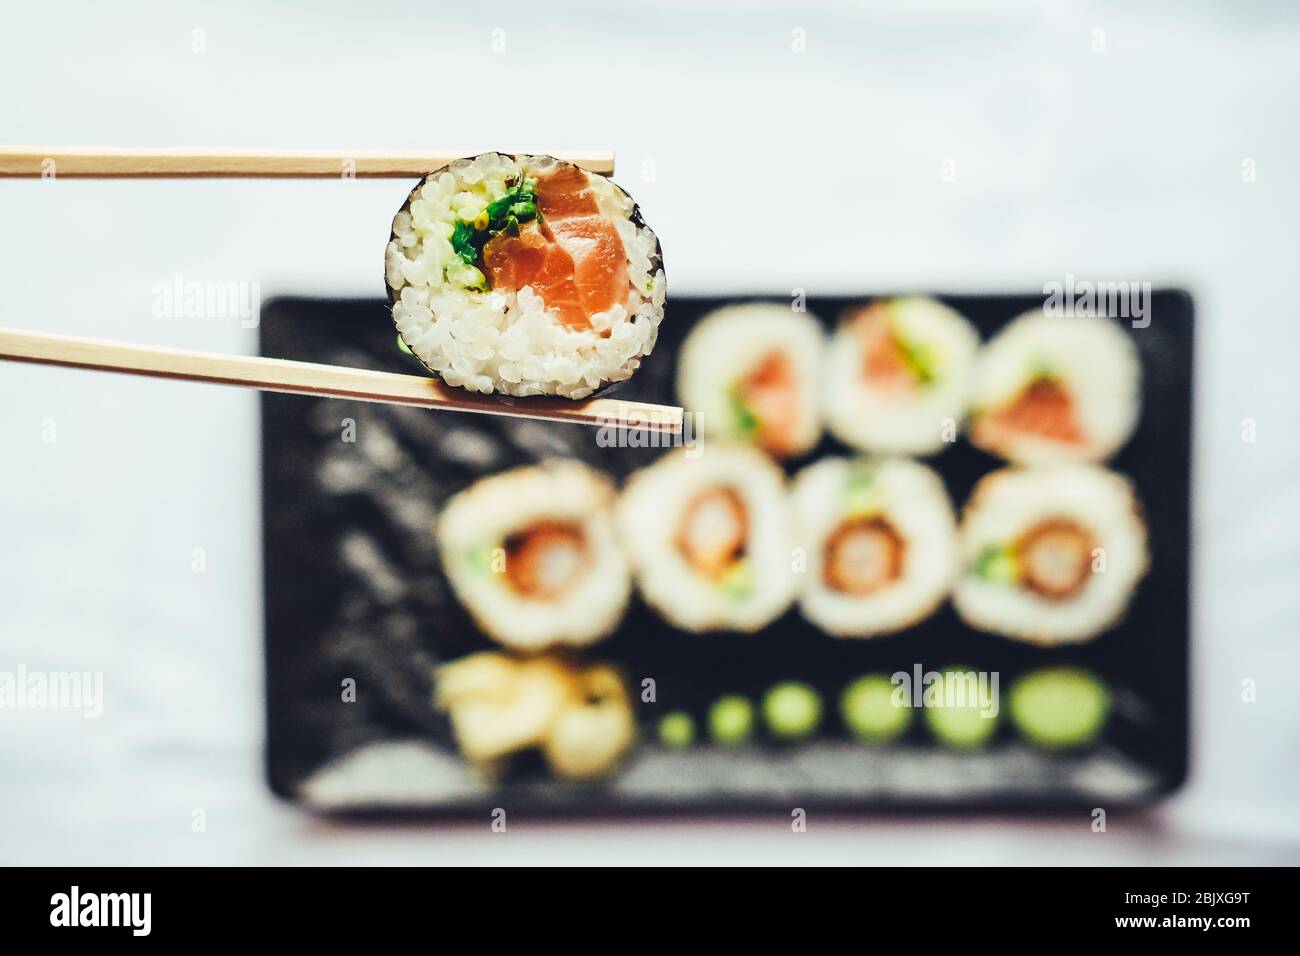 Closeup of chopsticks holding sushi infront of more sushi on a black plate over white background Stock Photo